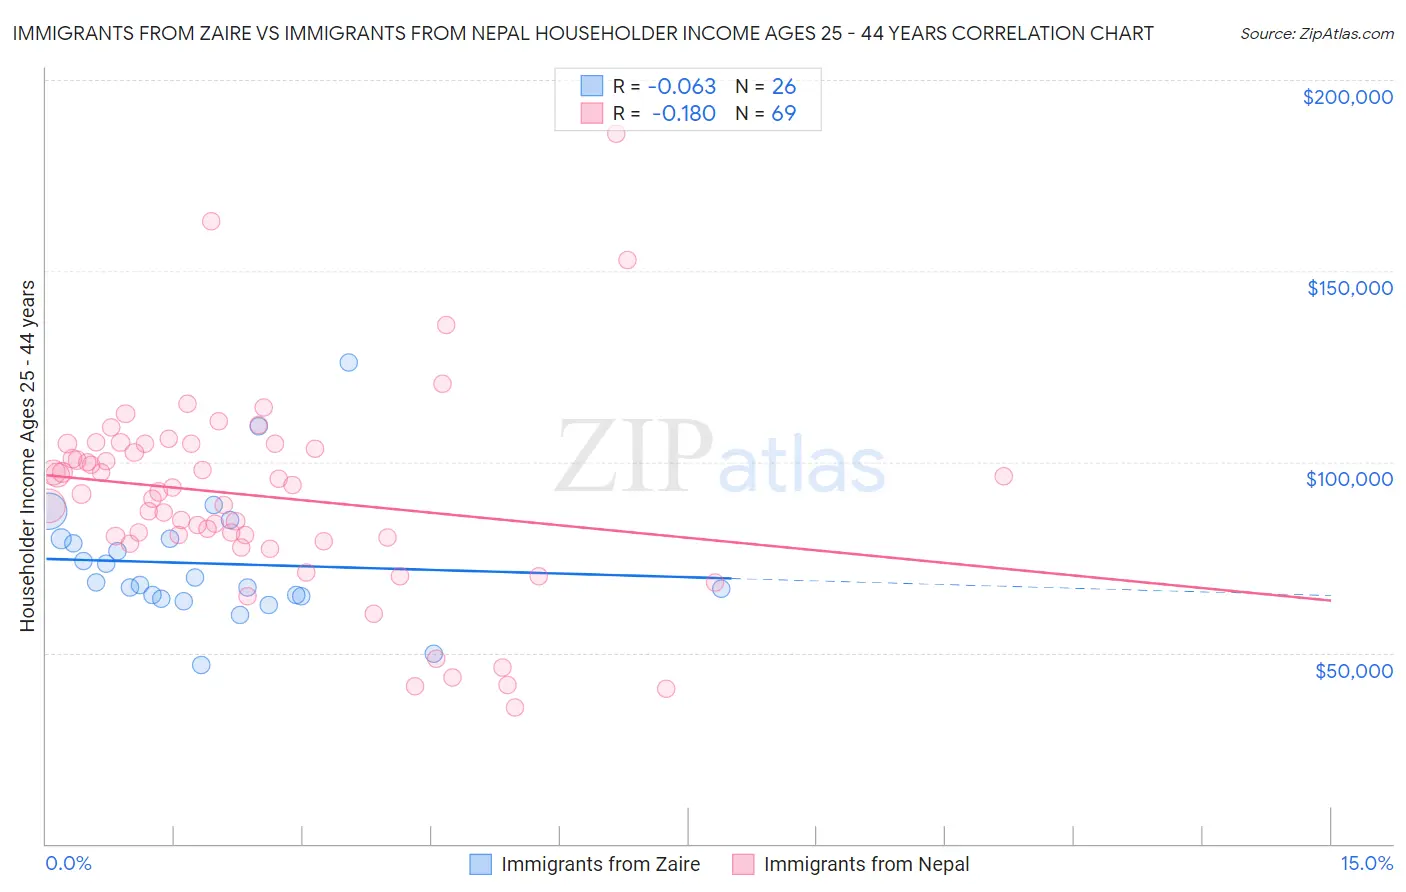 Immigrants from Zaire vs Immigrants from Nepal Householder Income Ages 25 - 44 years